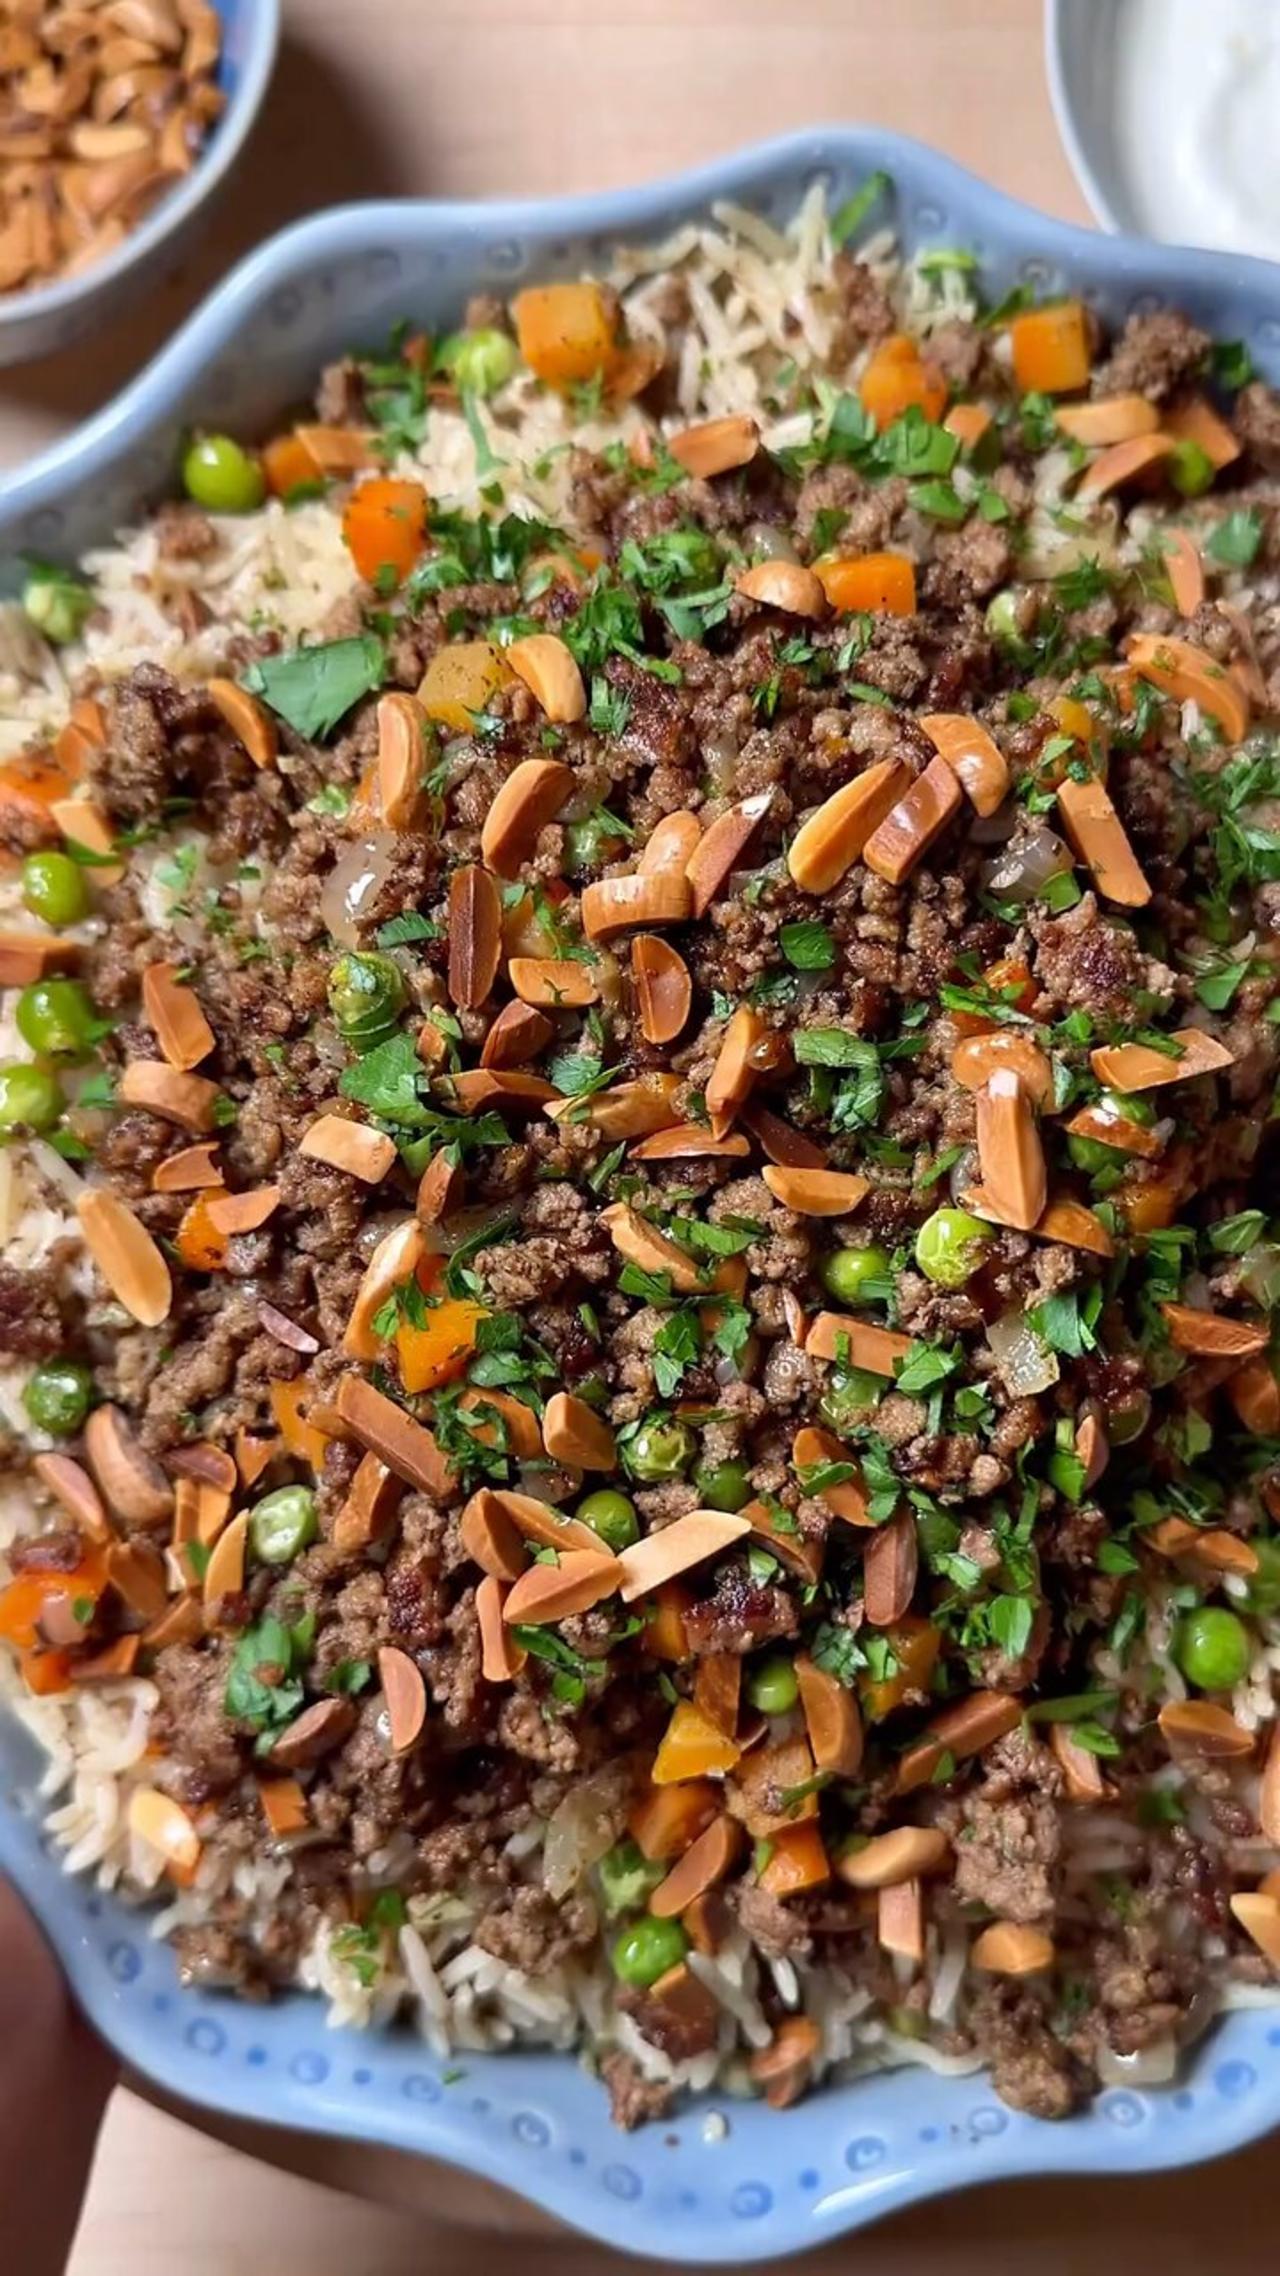 Sara l Nutrient Matters | One-Pan Meals - Episode One: Oozi Recipe ⬇️ 2 lbs ground beef